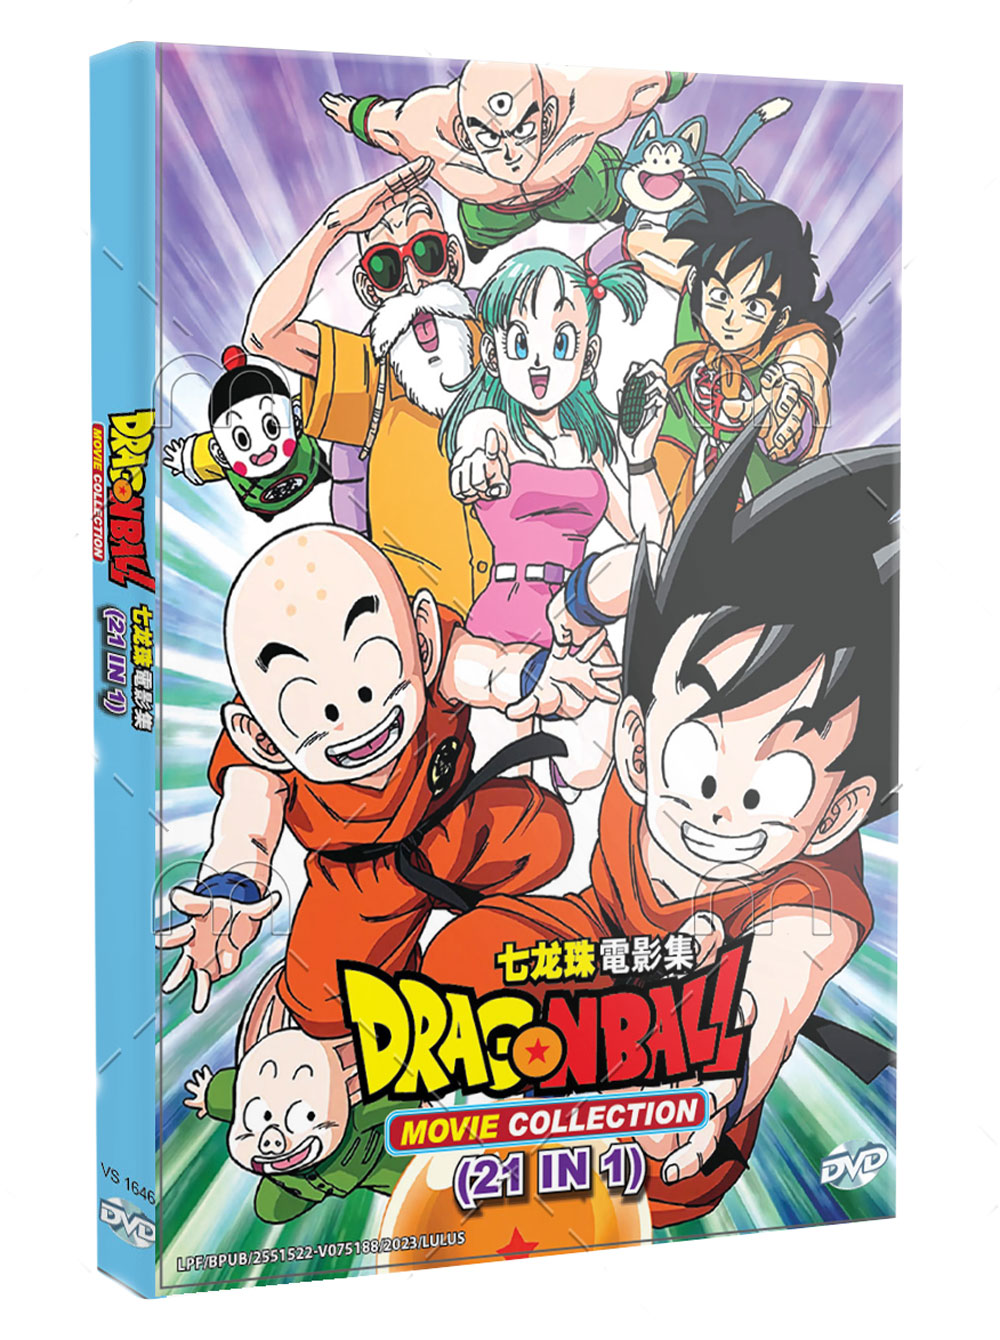 Dragon Ball Movie Collection 21 In 1 (DVD) (1986-2018) Anime